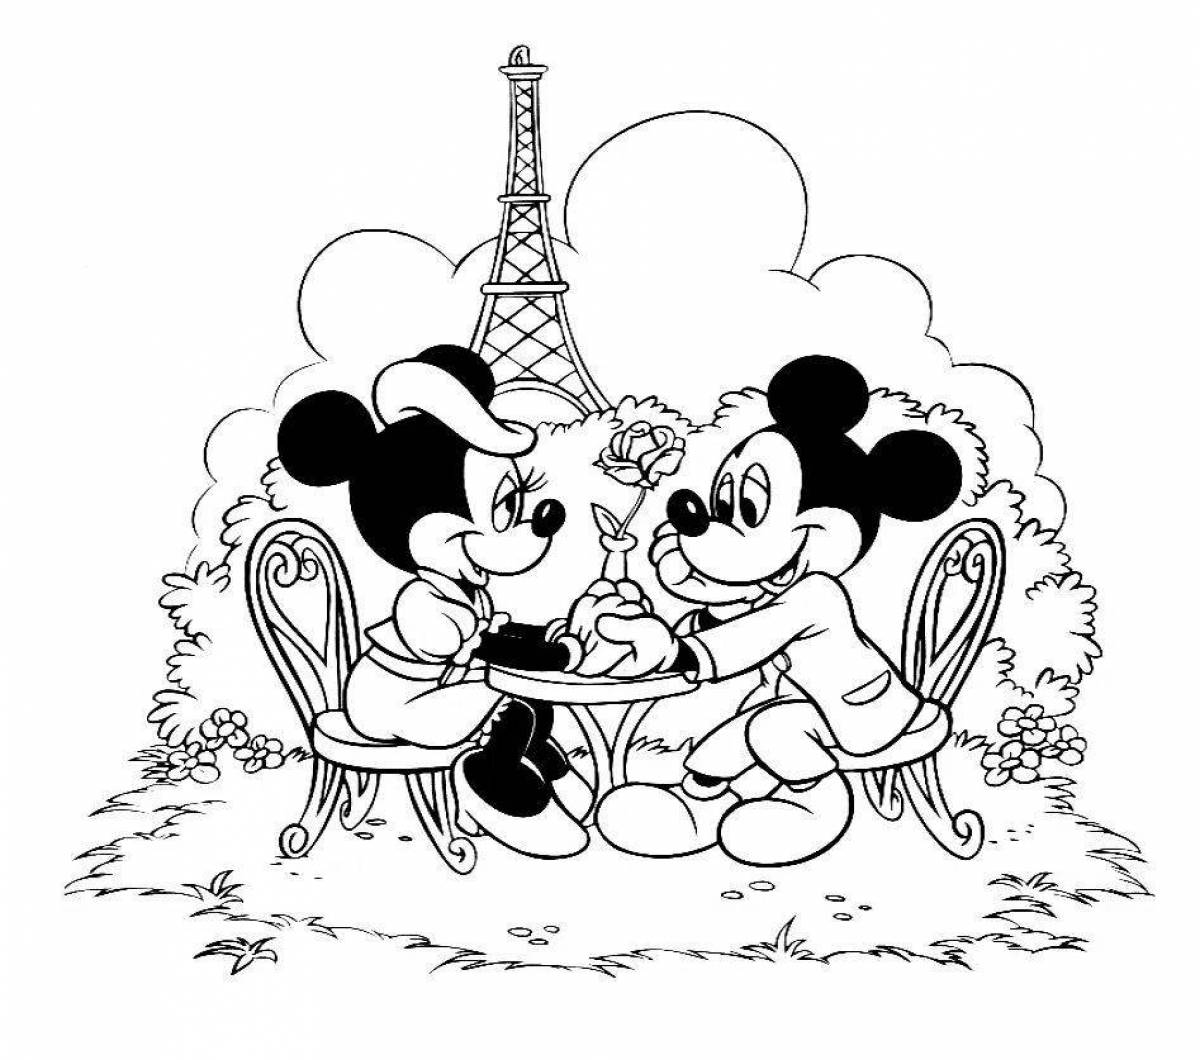 Mickey Mouse and Minnie Mouse #8